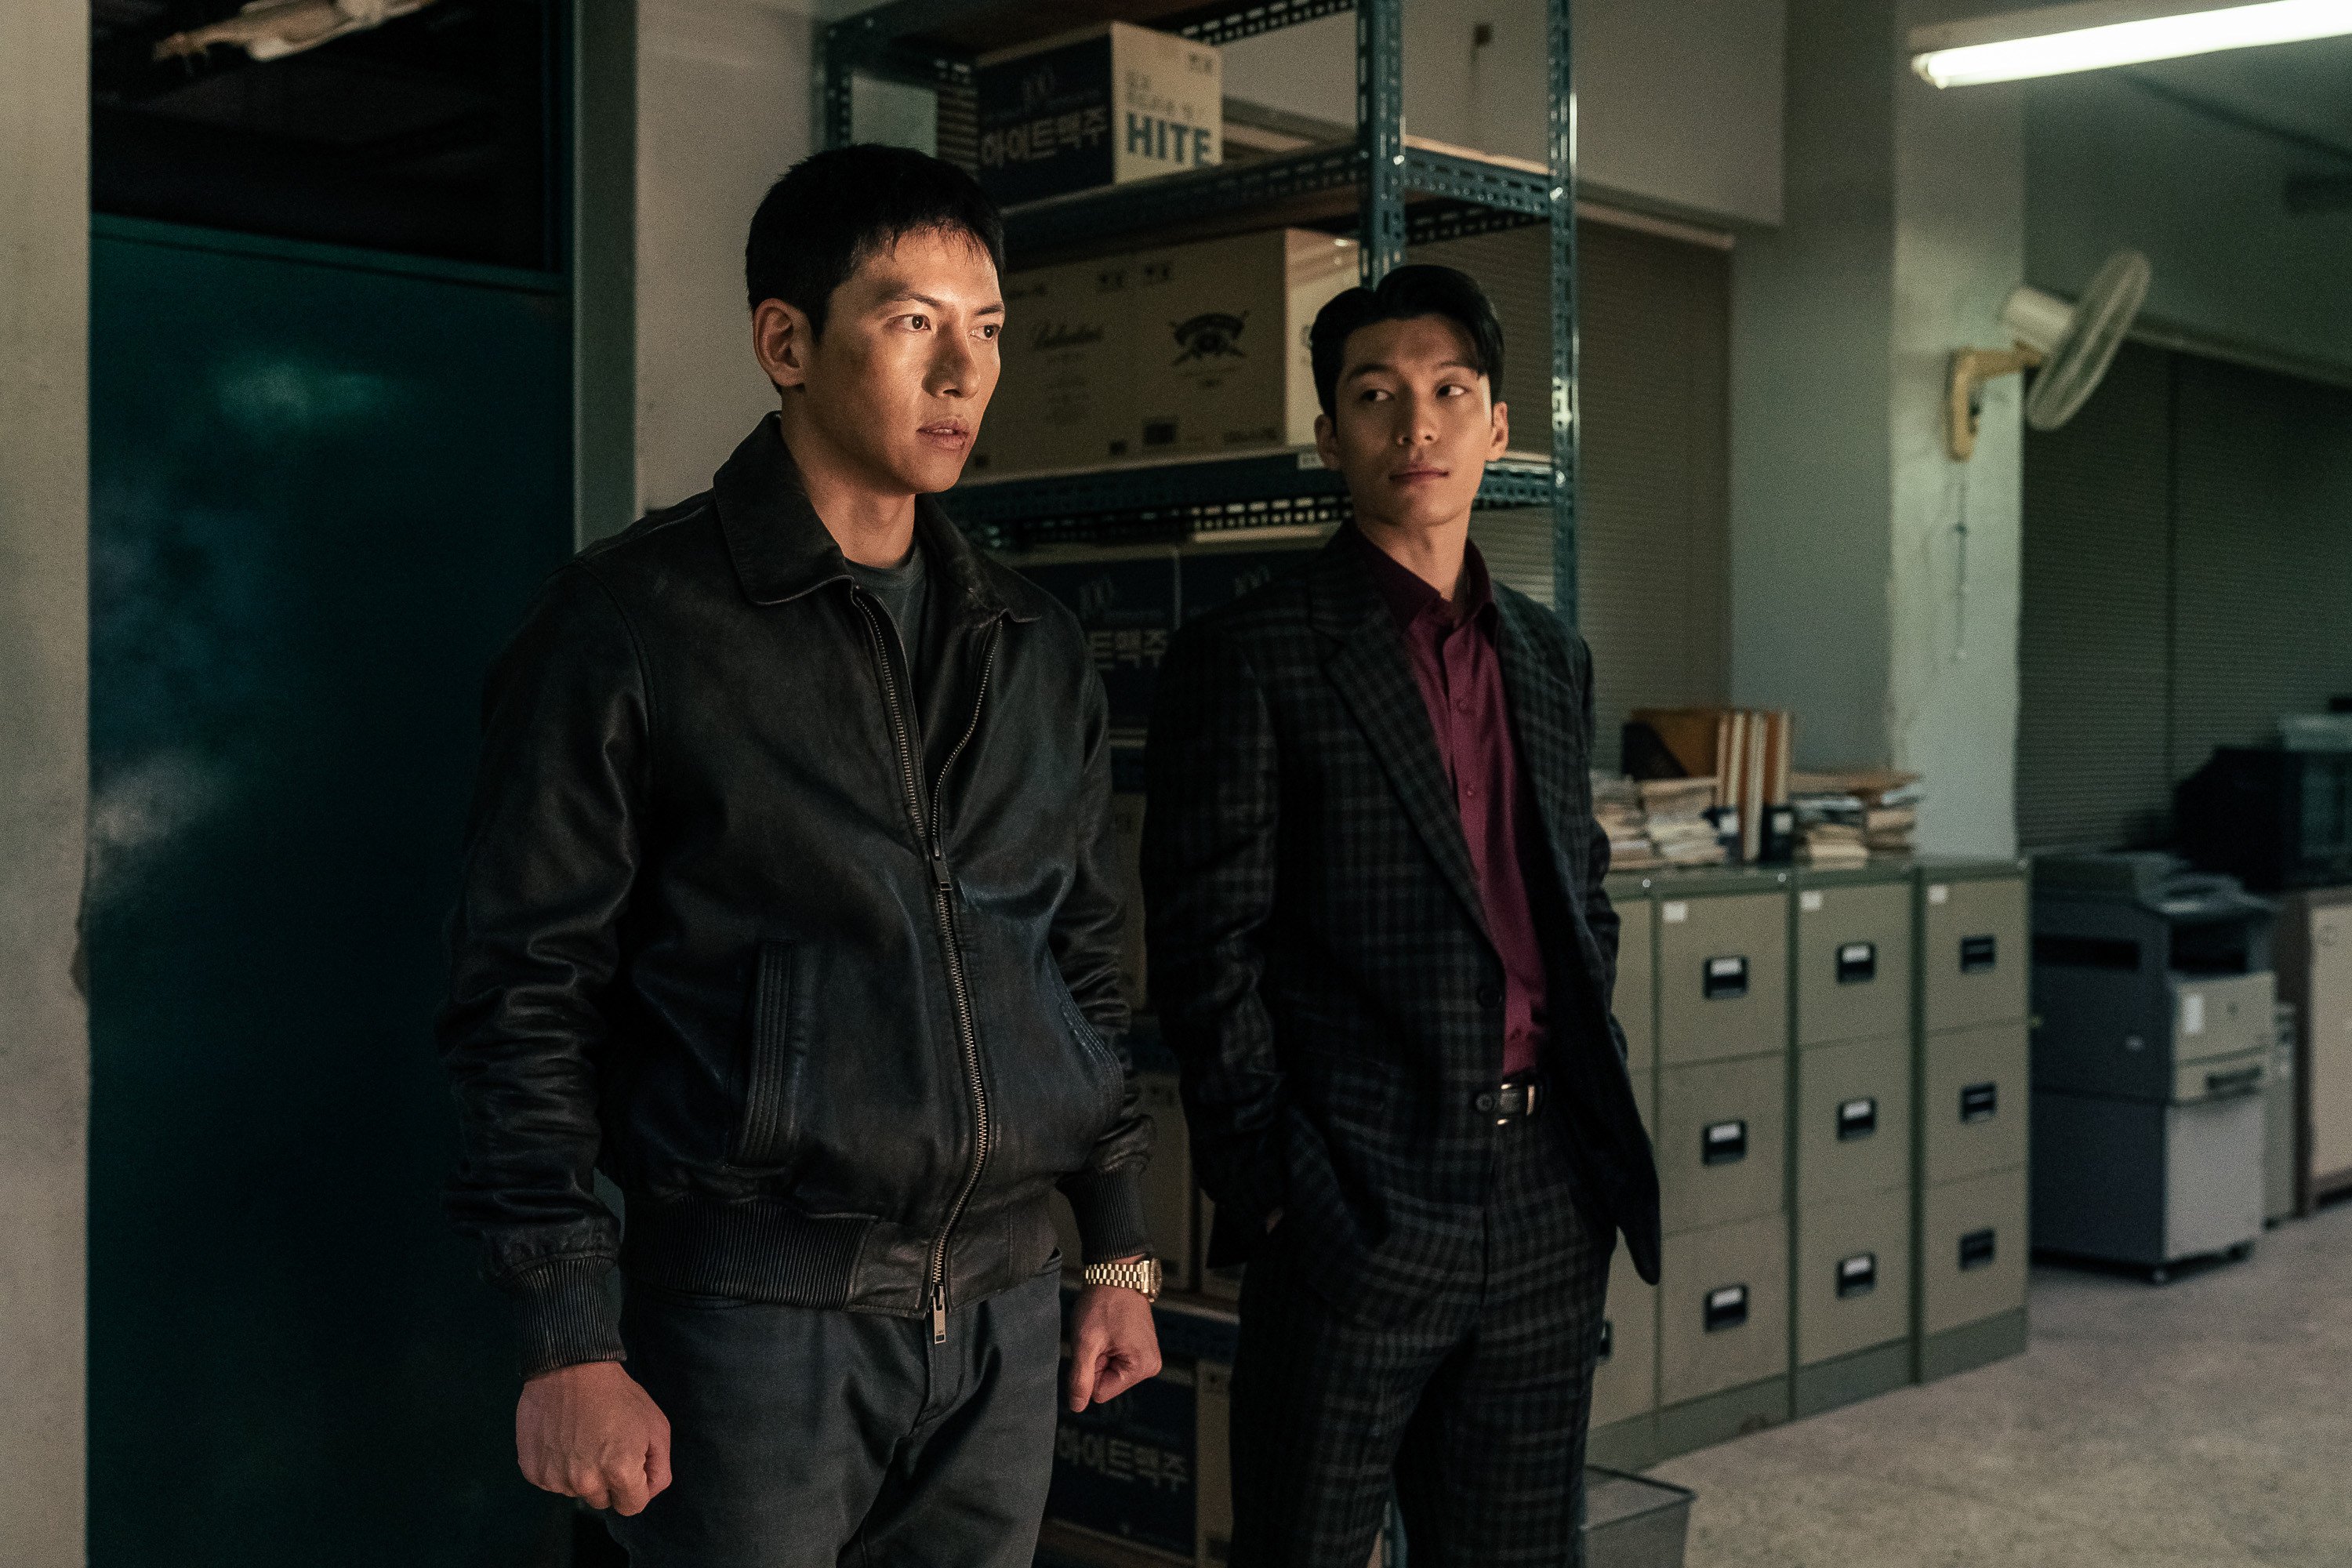 Ji Chang-wook (left) and Wi Ha-jun in a still from “The Worst of Evil”. Photo: Disney+